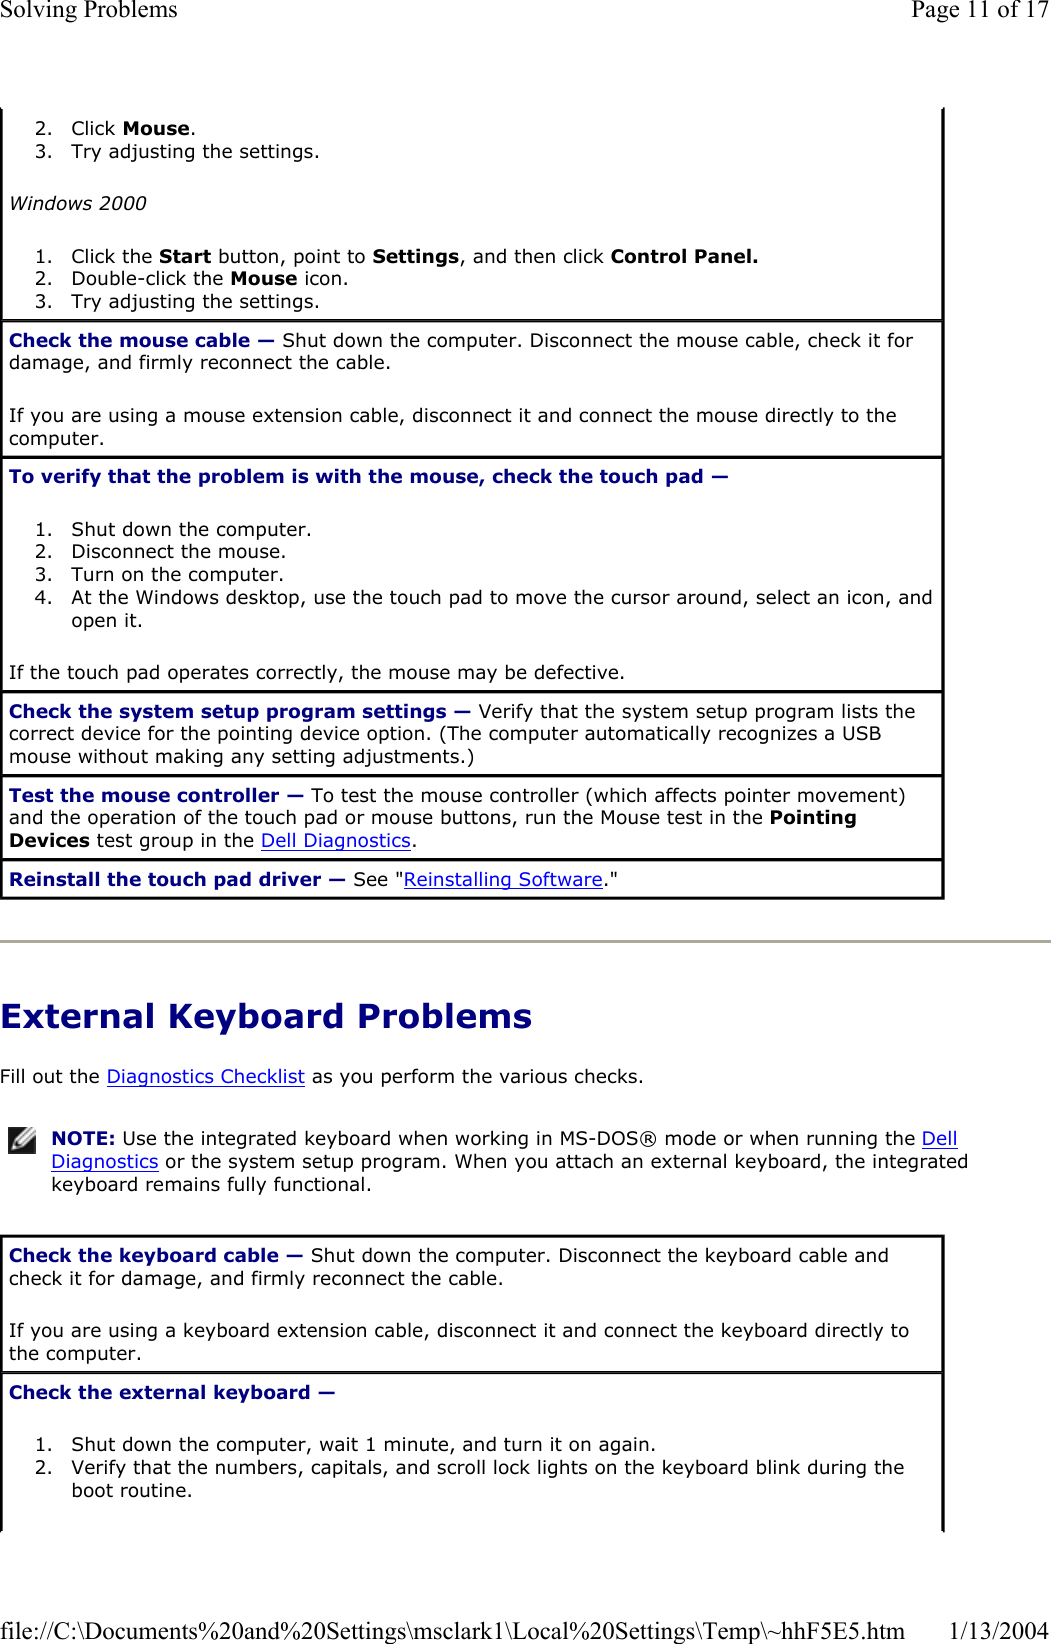 External Keyboard Problems Fill out the Diagnostics Checklist as you perform the various checks. 2. Click Mouse.3. Try adjusting the settings.  Windows 20001. Click the Start button, point to Settings, and then click Control Panel.2. Double-click the Mouse icon.  3. Try adjusting the settings.  Check the mouse cable — Shut down the computer. Disconnect the mouse cable, check it for damage, and firmly reconnect the cable. If you are using a mouse extension cable, disconnect it and connect the mouse directly to the computer. To verify that the problem is with the mouse, check the touch pad —1. Shut down the computer.  2. Disconnect the mouse.  3. Turn on the computer.  4. At the Windows desktop, use the touch pad to move the cursor around, select an icon, and open it.If the touch pad operates correctly, the mouse may be defective. Check the system setup program settings — Verify that the system setup program lists the correct device for the pointing device option. (The computer automatically recognizes a USB mouse without making any setting adjustments.) Test the mouse controller — To test the mouse controller (which affects pointer movement) and the operation of the touch pad or mouse buttons, run the Mouse test in the Pointing Devices test group in the Dell Diagnostics.Reinstall the touch pad driver — See &quot;Reinstalling Software.&quot;NOTE: Use the integrated keyboard when working in MS-DOS® mode or when running the Dell Diagnostics or the system setup program. When you attach an external keyboard, the integrated keyboard remains fully functional.Check the keyboard cable — Shut down the computer. Disconnect the keyboard cable and check it for damage, and firmly reconnect the cable. If you are using a keyboard extension cable, disconnect it and connect the keyboard directly to the computer. Check the external keyboard —1. Shut down the computer, wait 1 minute, and turn it on again.  2. Verify that the numbers, capitals, and scroll lock lights on the keyboard blink during the boot routine.  Page 11 of 17Solving Problems1/13/2004file://C:\Documents%20and%20Settings\msclark1\Local%20Settings\Temp\~hhF5E5.htm